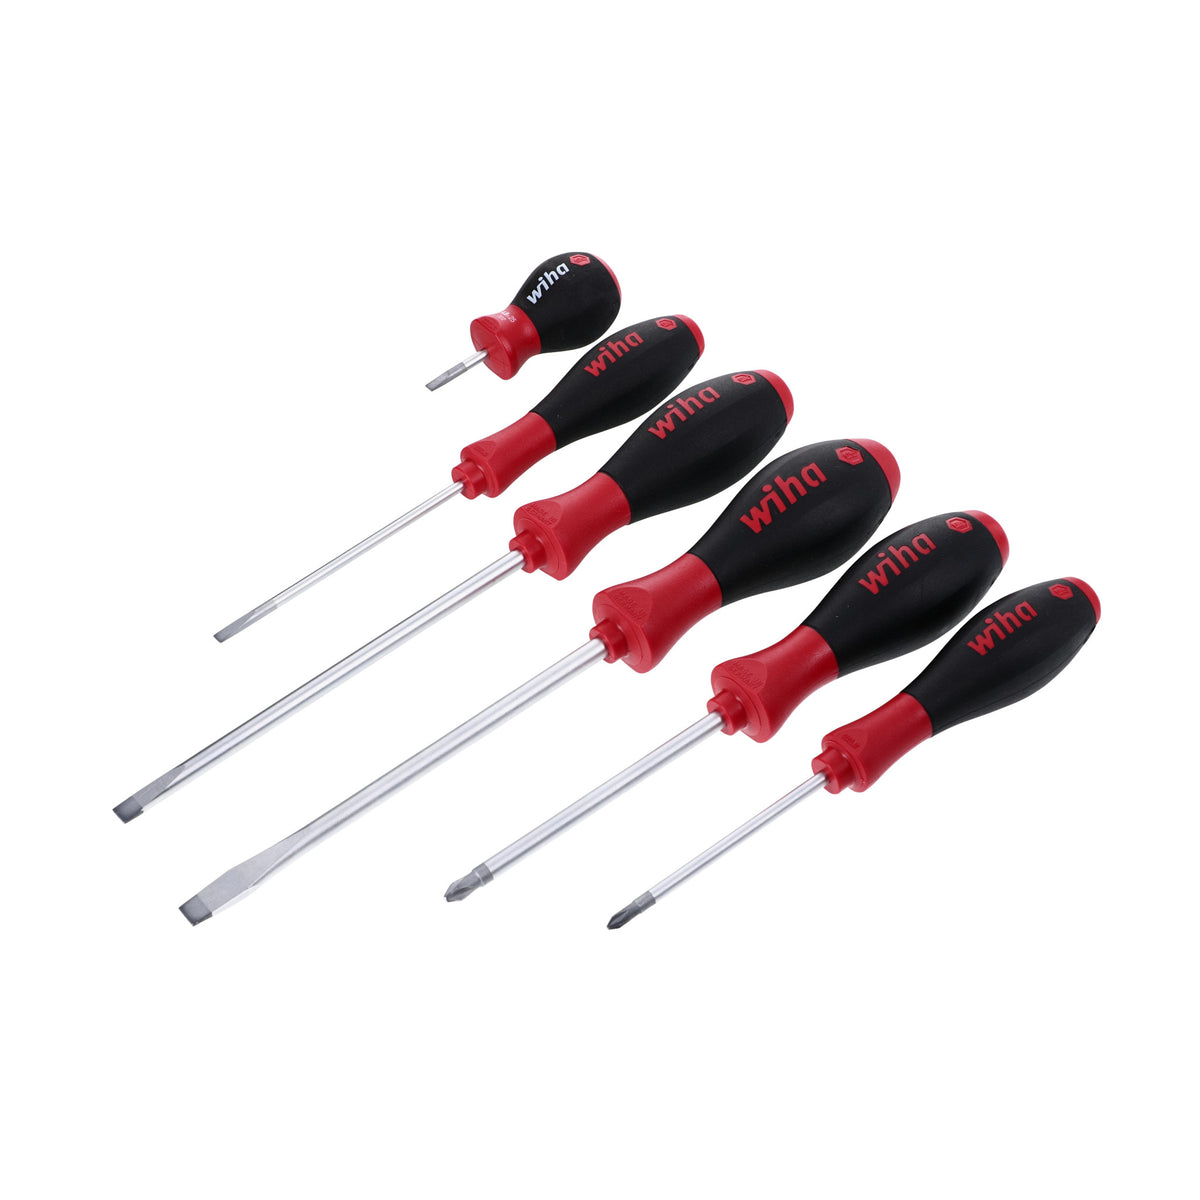 Wiha 30294 6 Piece SoftFinish Slotted and Phillips Screwdriver Set